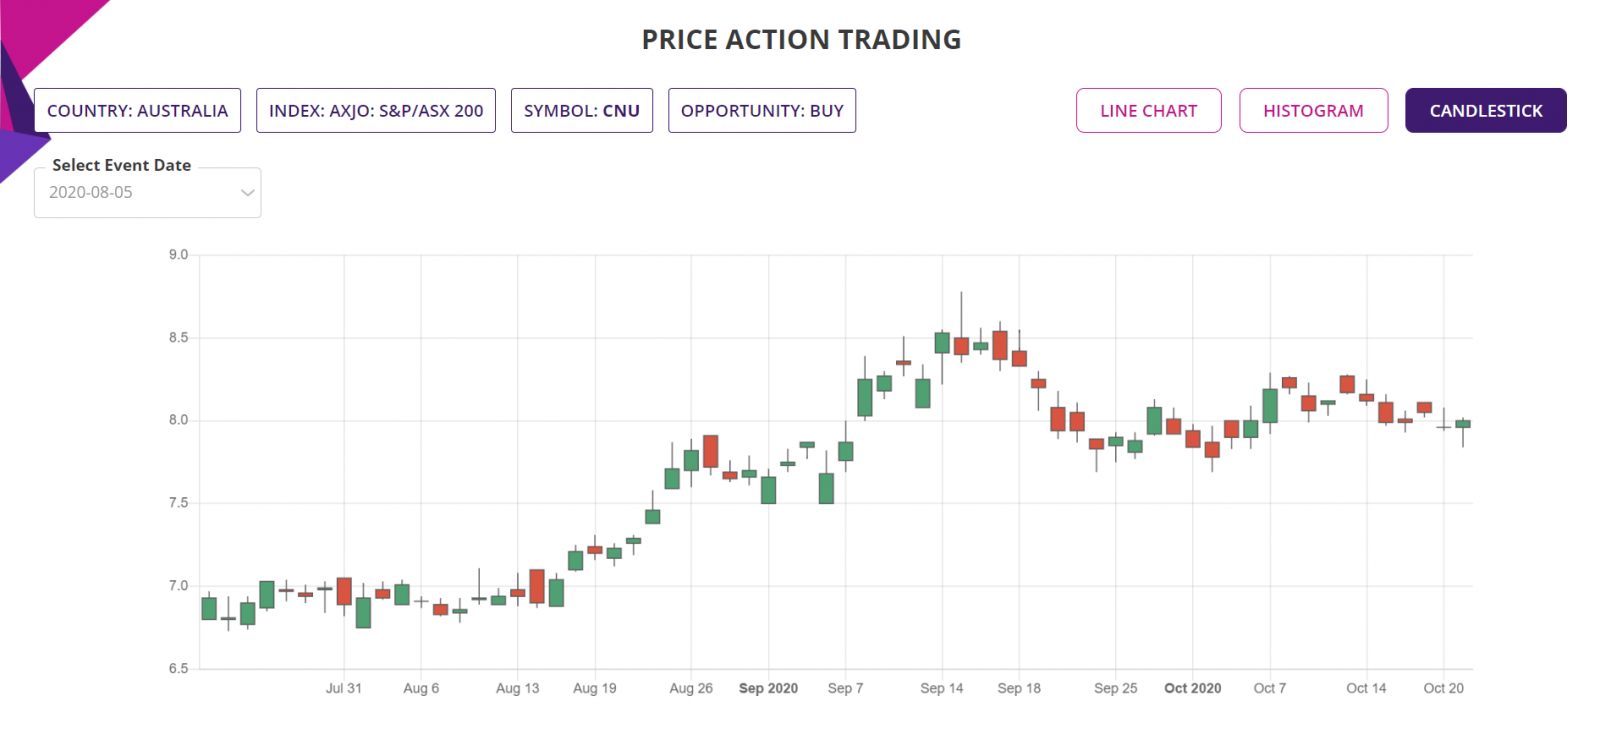 Price action trading strategy Blog, Sapphire Capitals, ASX200 Stocks, candlestick chart